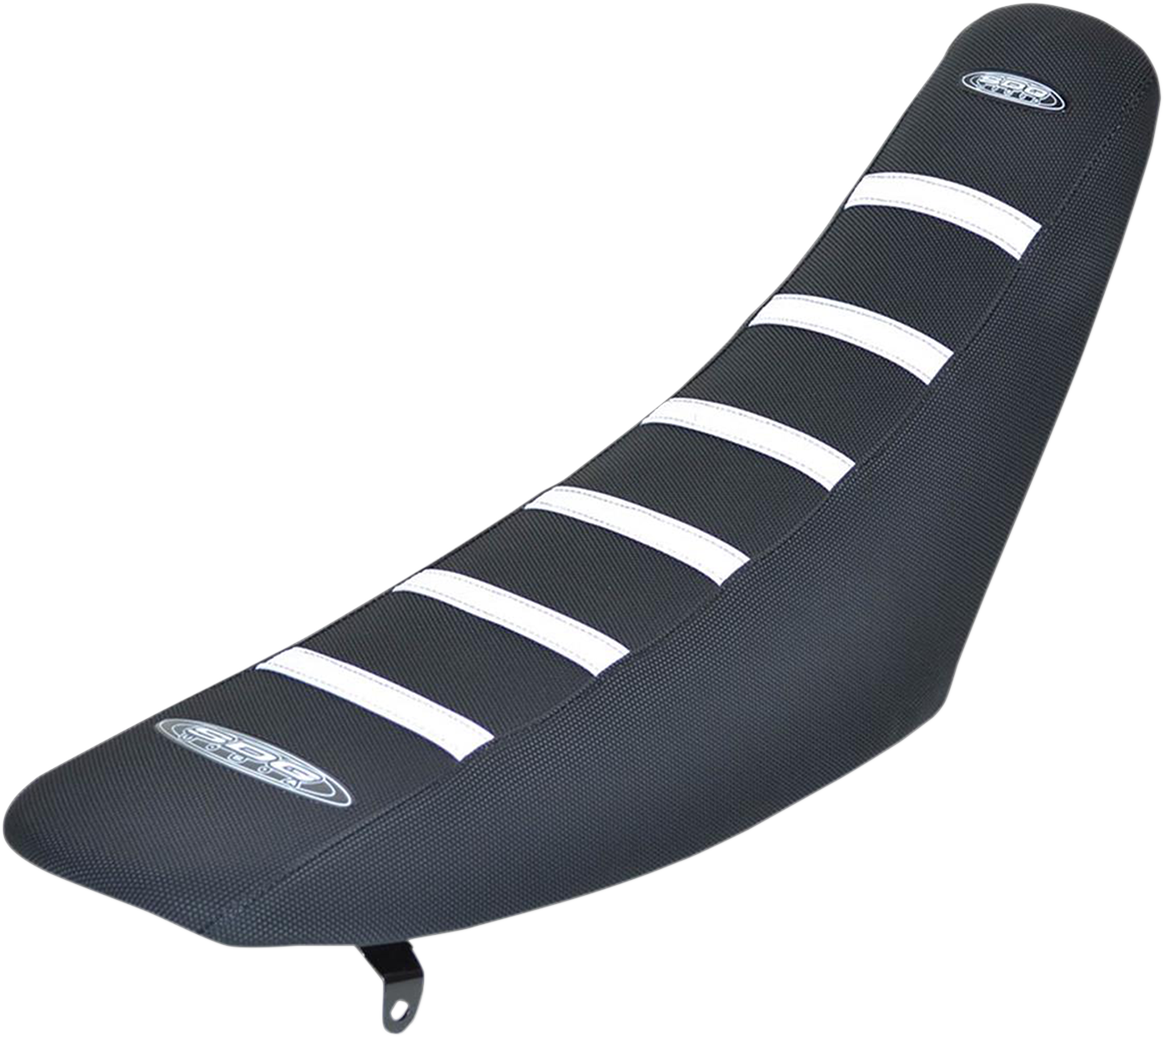 SDG 6-Ribbed Seat Cover - White Ribs/Black Top/Black Sides 95945WK